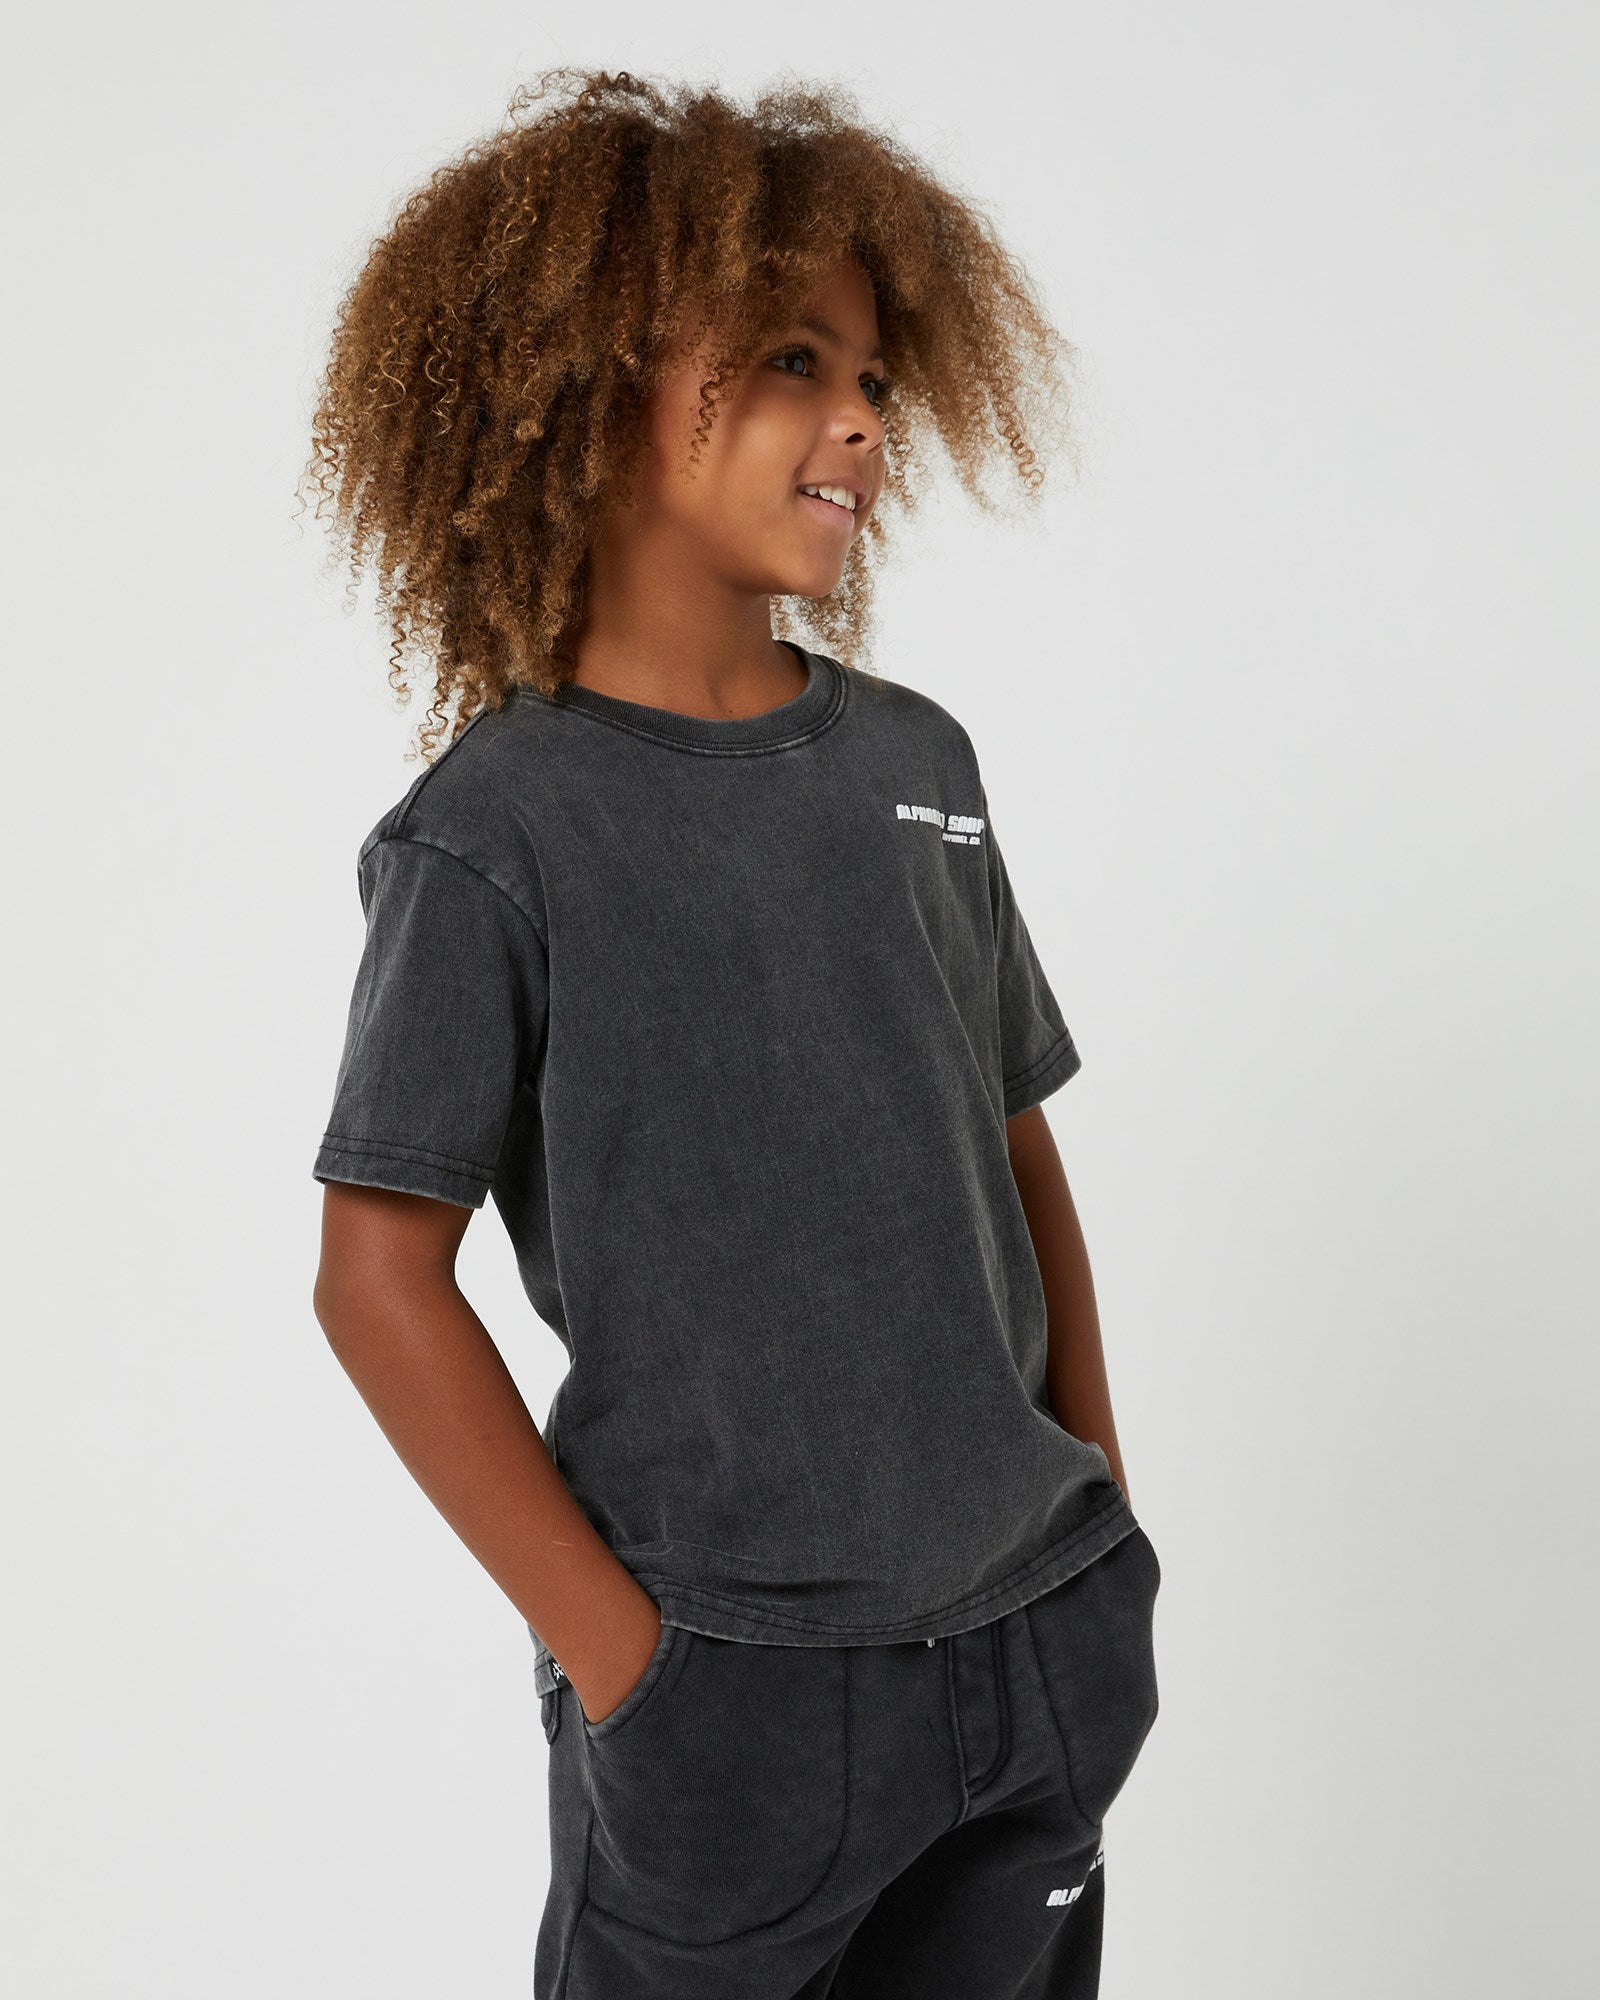 Teen Boys San Clemente Tee from Alphabet Soup. 100% cotton with vintage dye wash. Puff logo print. Straight hemline, short sleeves. Comfortable and casual.